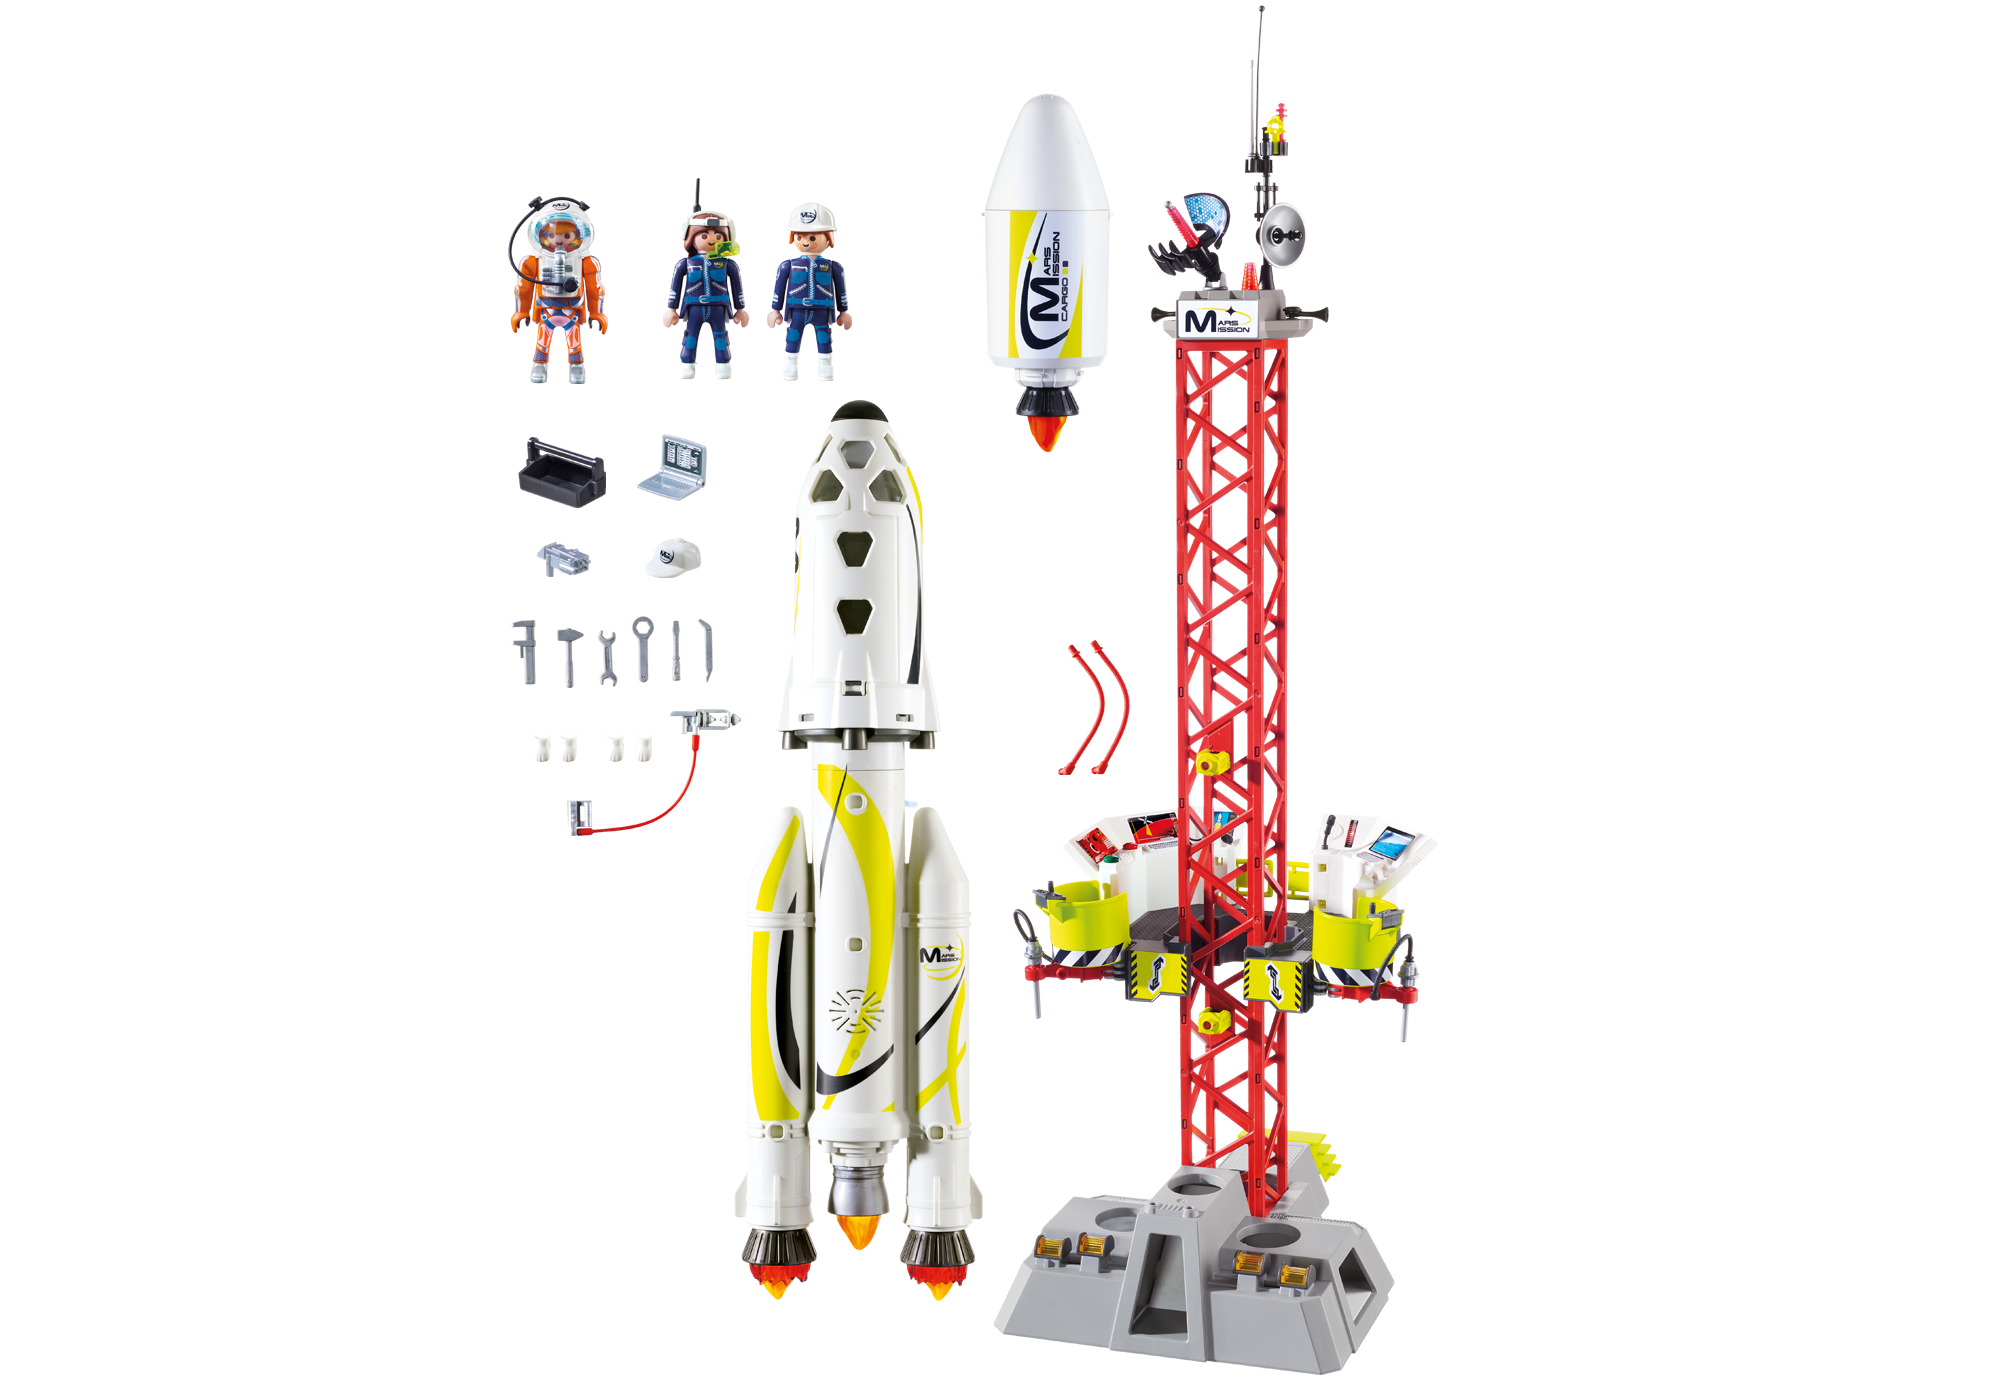 playmobil 9488 space mission rocket